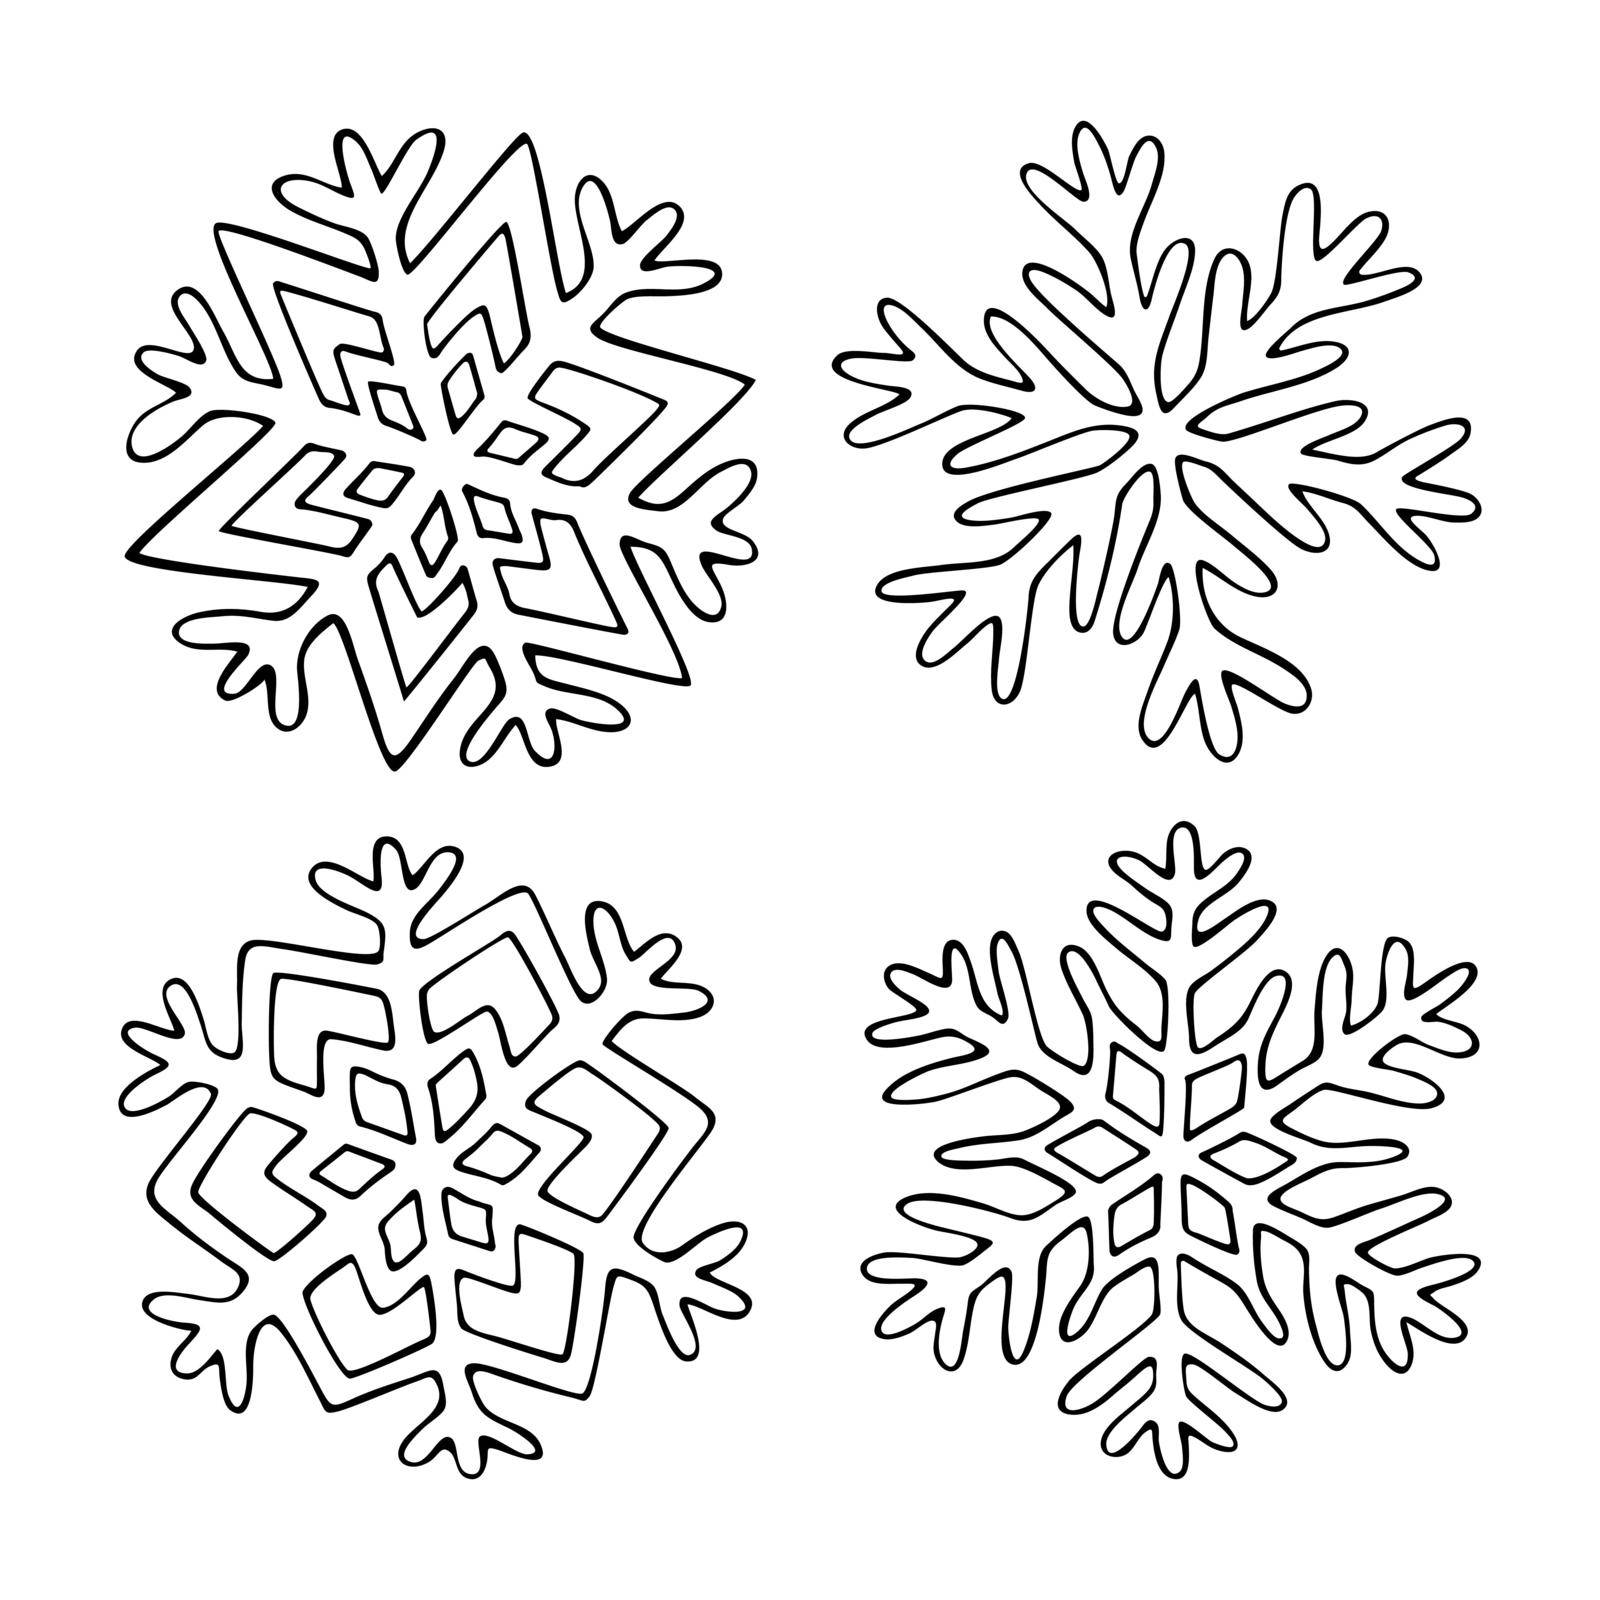 Set snowflakes doodle line art. Frozen ice crystals with different patterns. Winter symbol. Hand drawn vector graphic black and white illustration.b